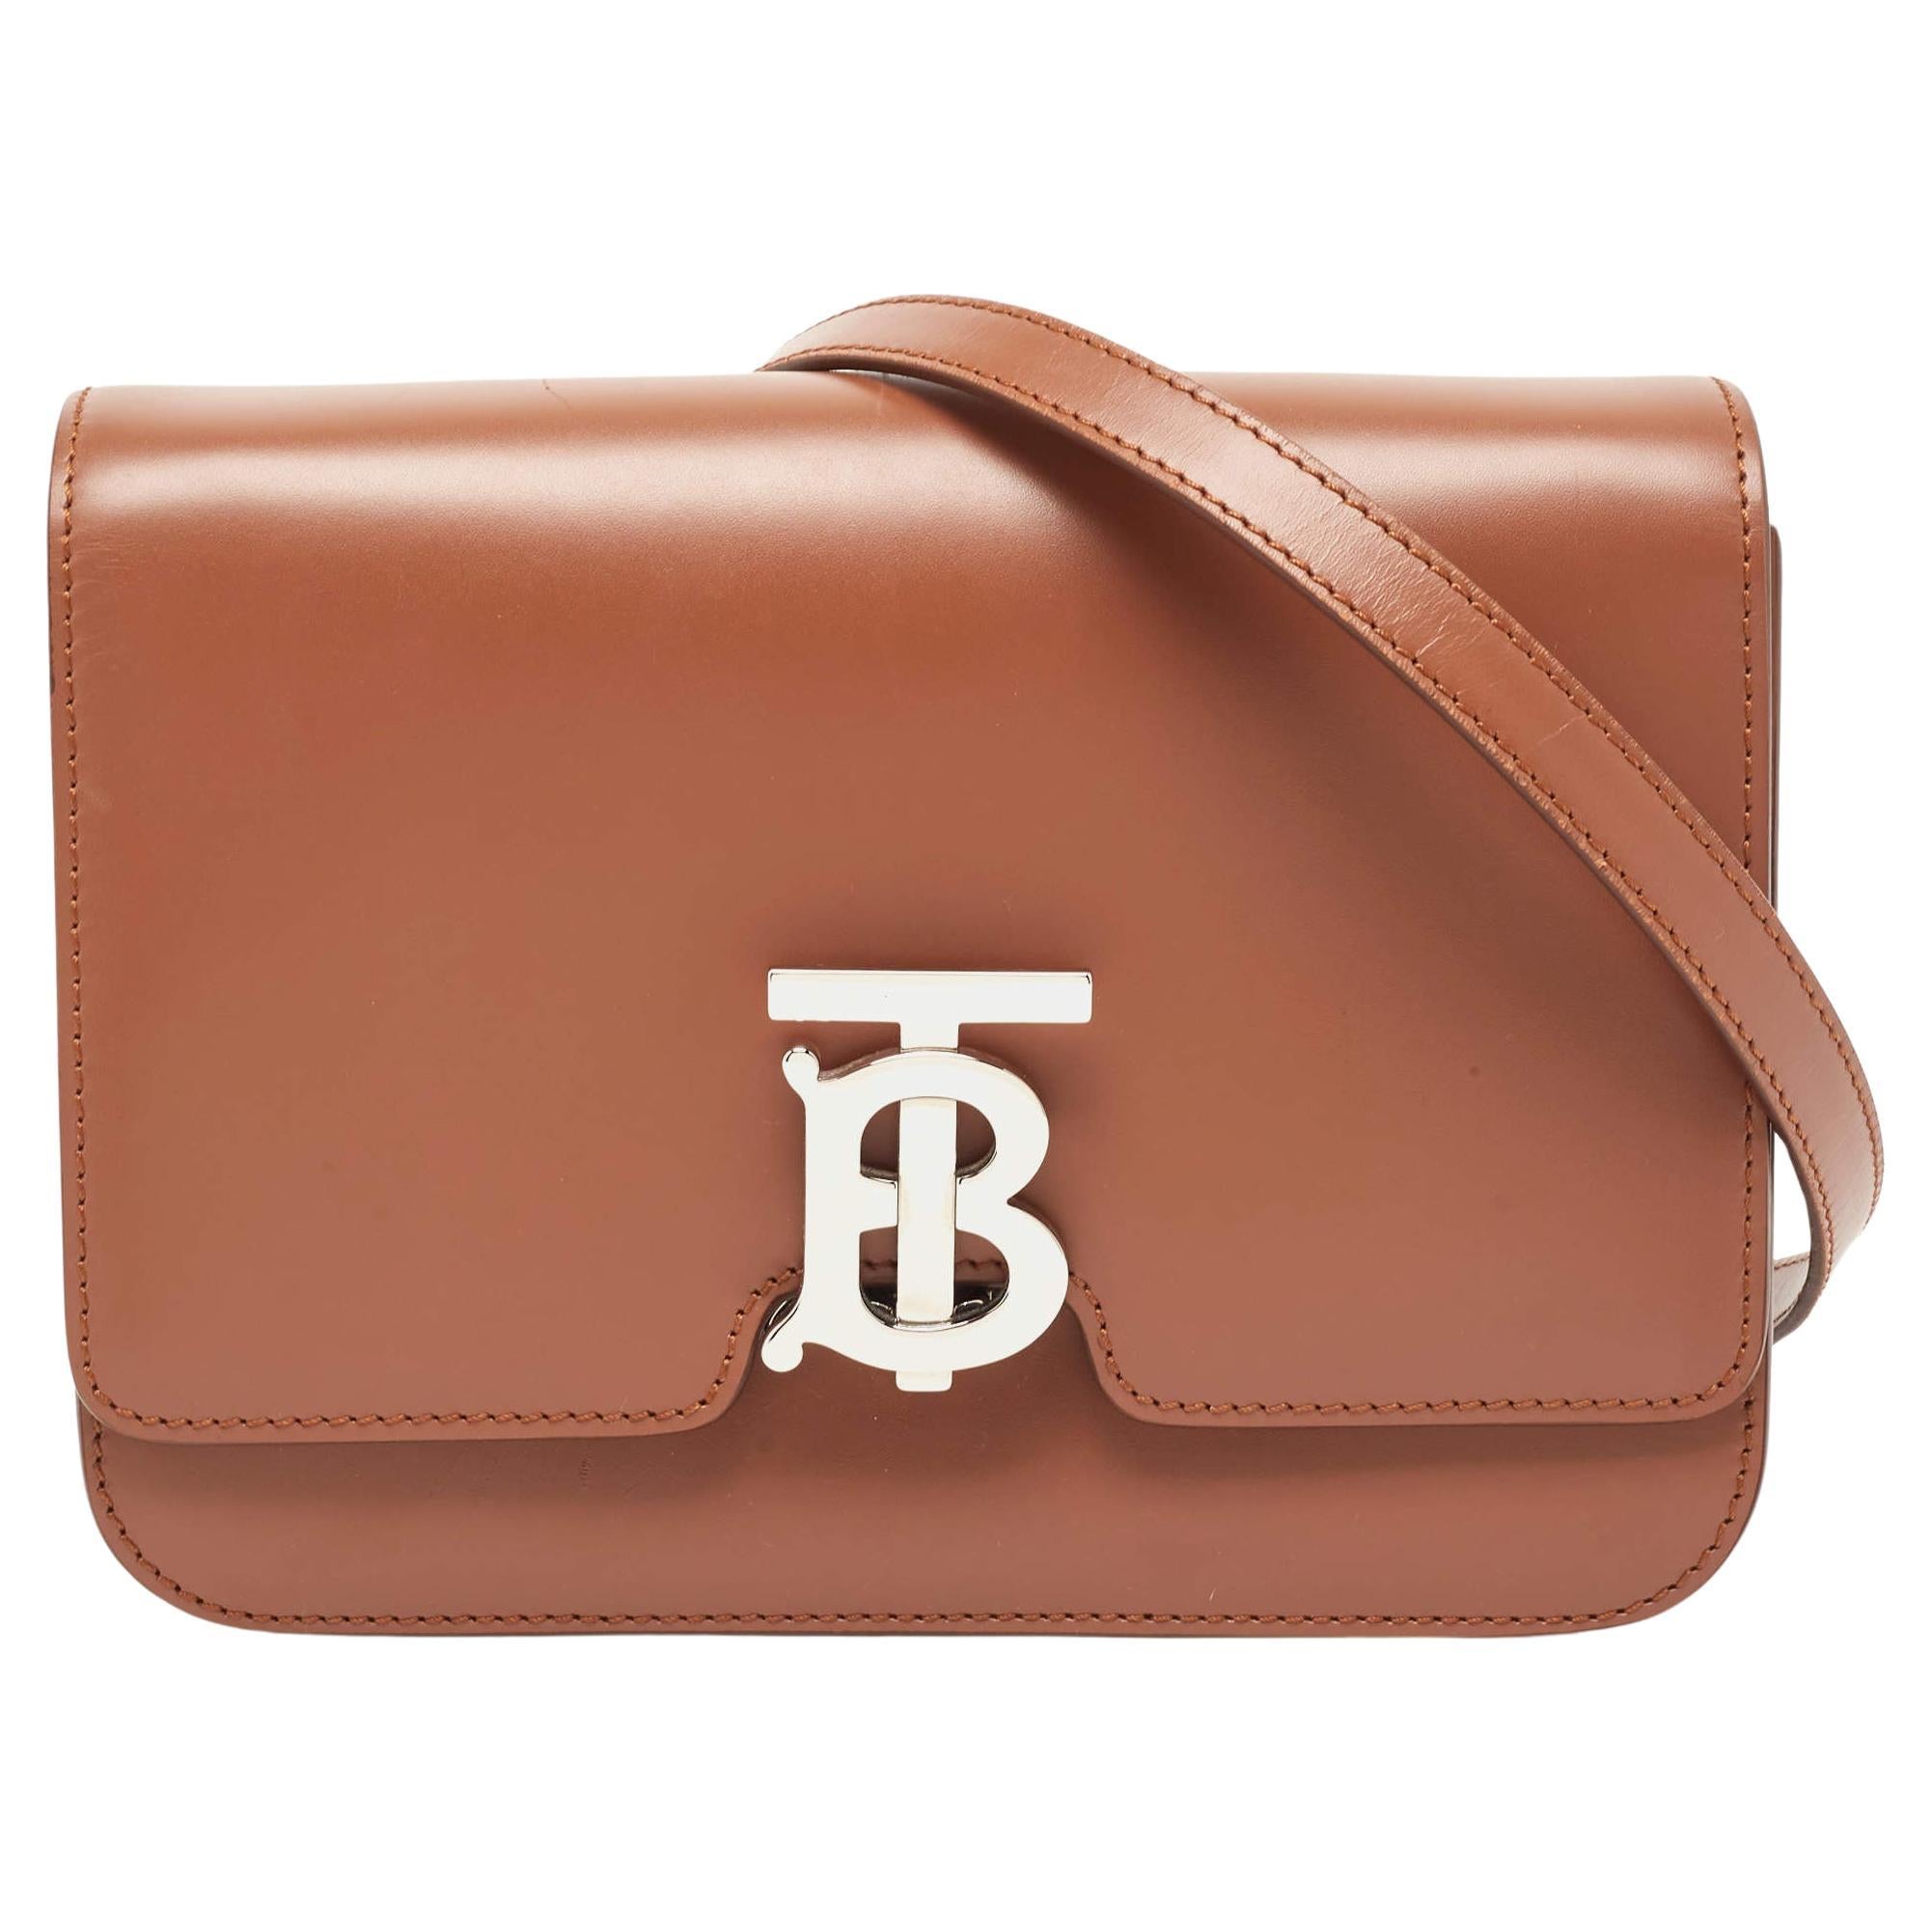 Burberry Brown Leather Small TB Shoulder Bag For Sale